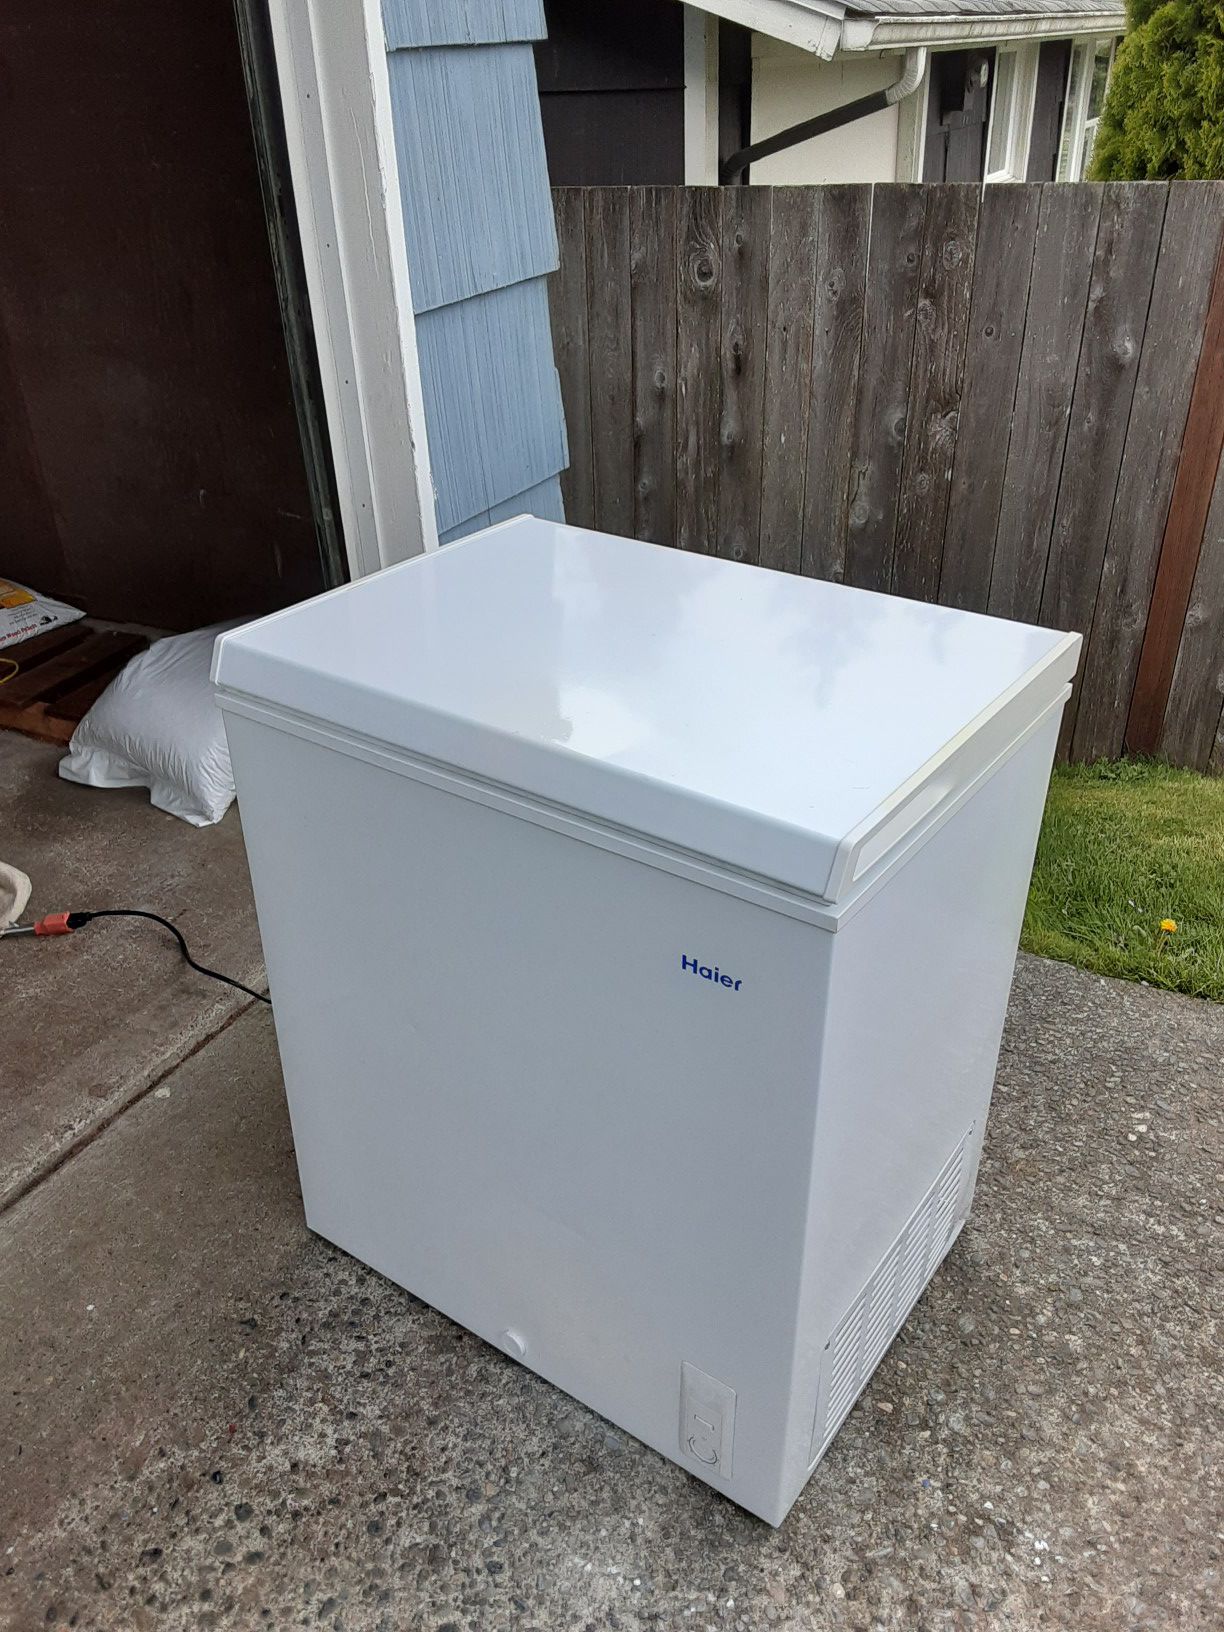 Chest Freezer 5 Cubic Feet Delivery Is Available~ Firm On My Price~ For Sale In Everett Wa